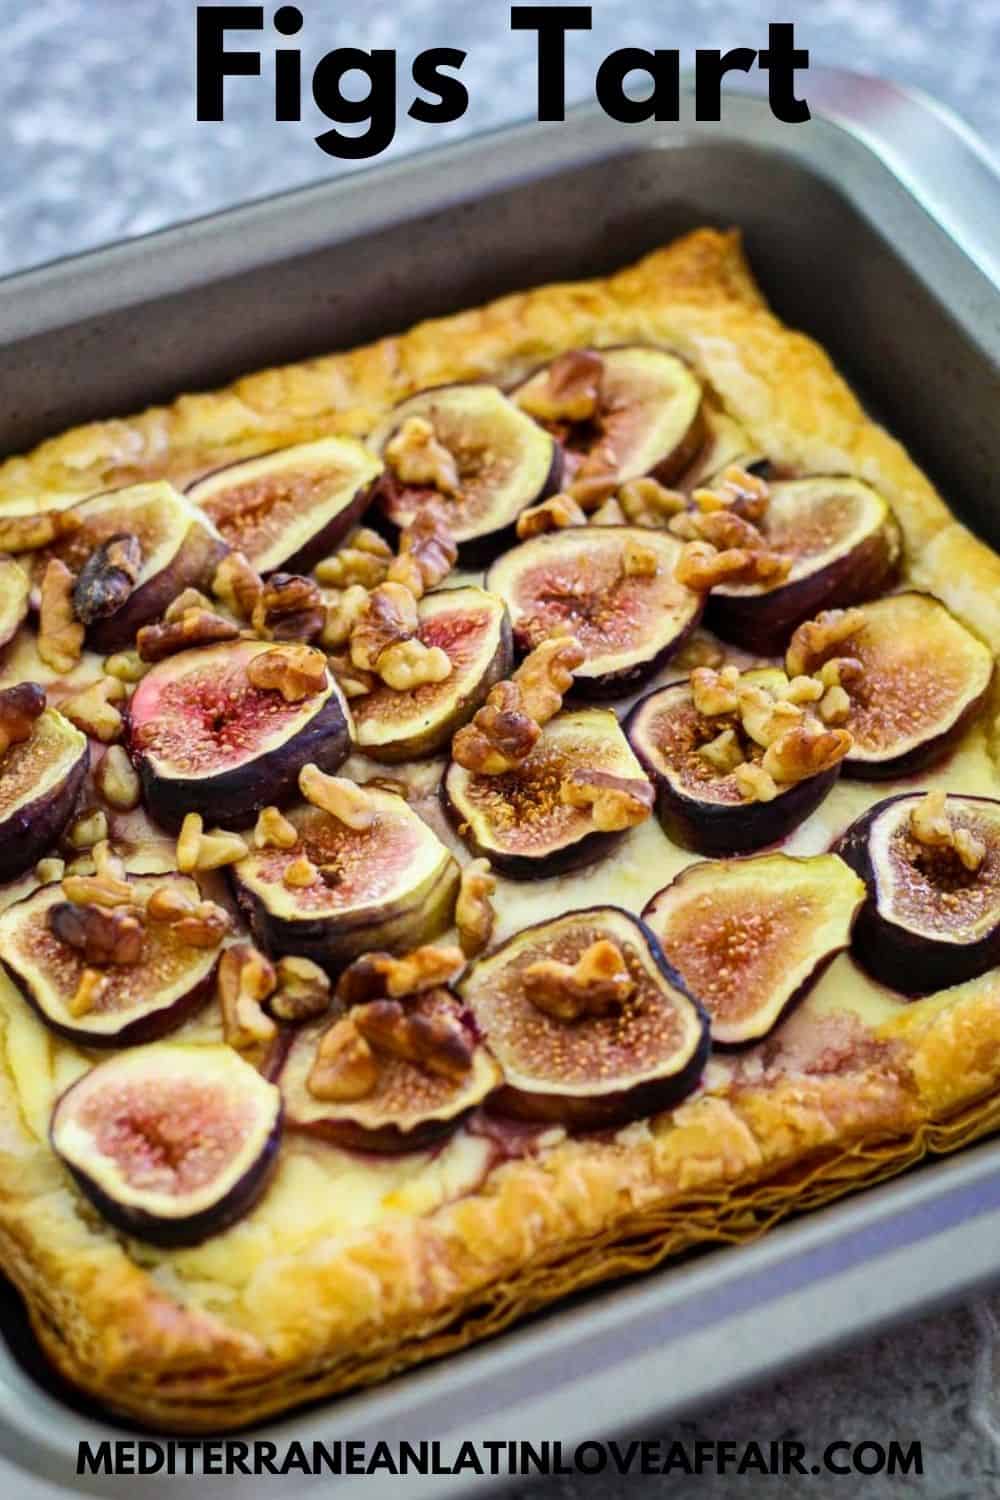 An image prepared for Pinterest with a figs tart just baked shown still in the baking pan. There's a title on top of the image and a website link at the bottom. 